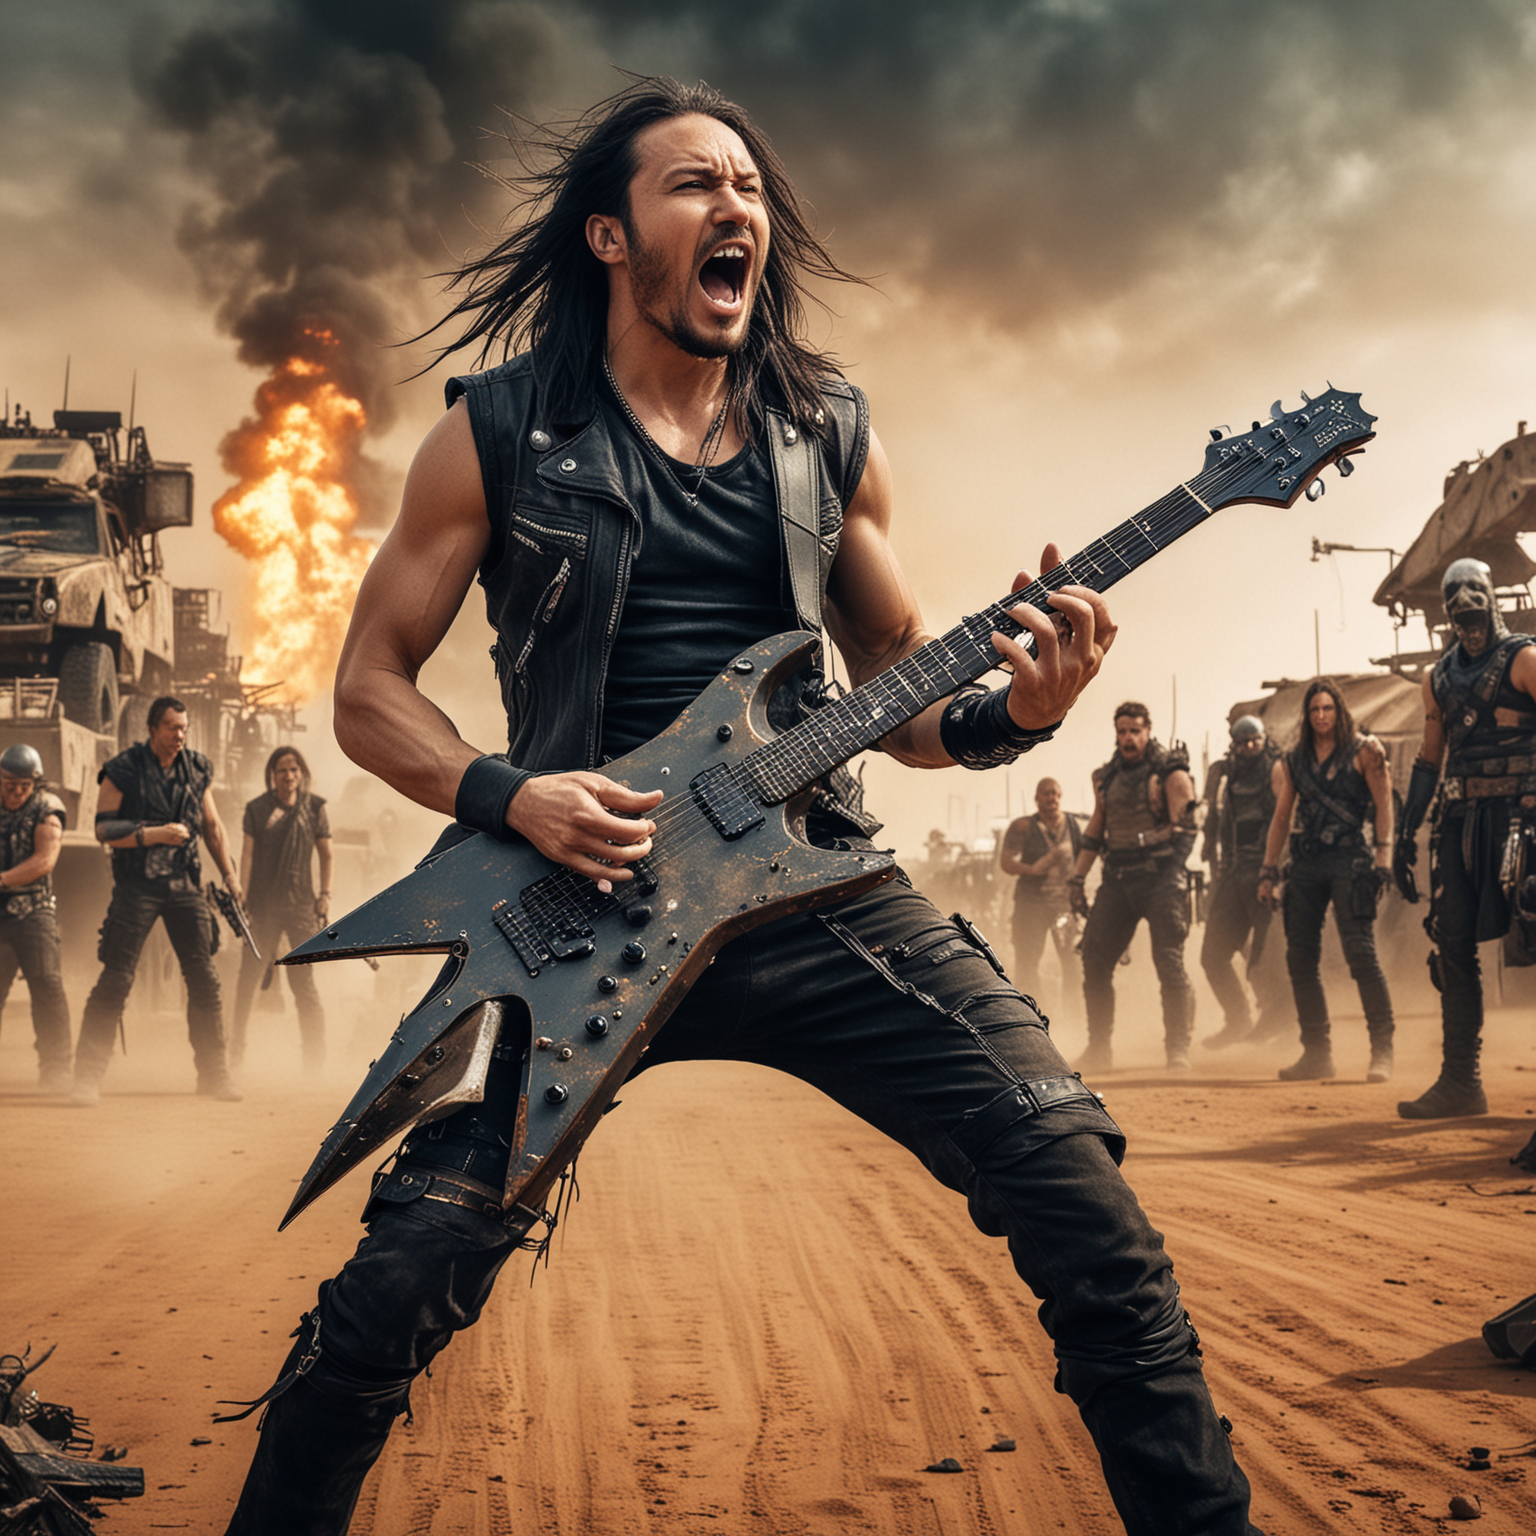 Herman from Dragonforce Shreds Guitar in PostApocalyptic Mad Max Style Setting